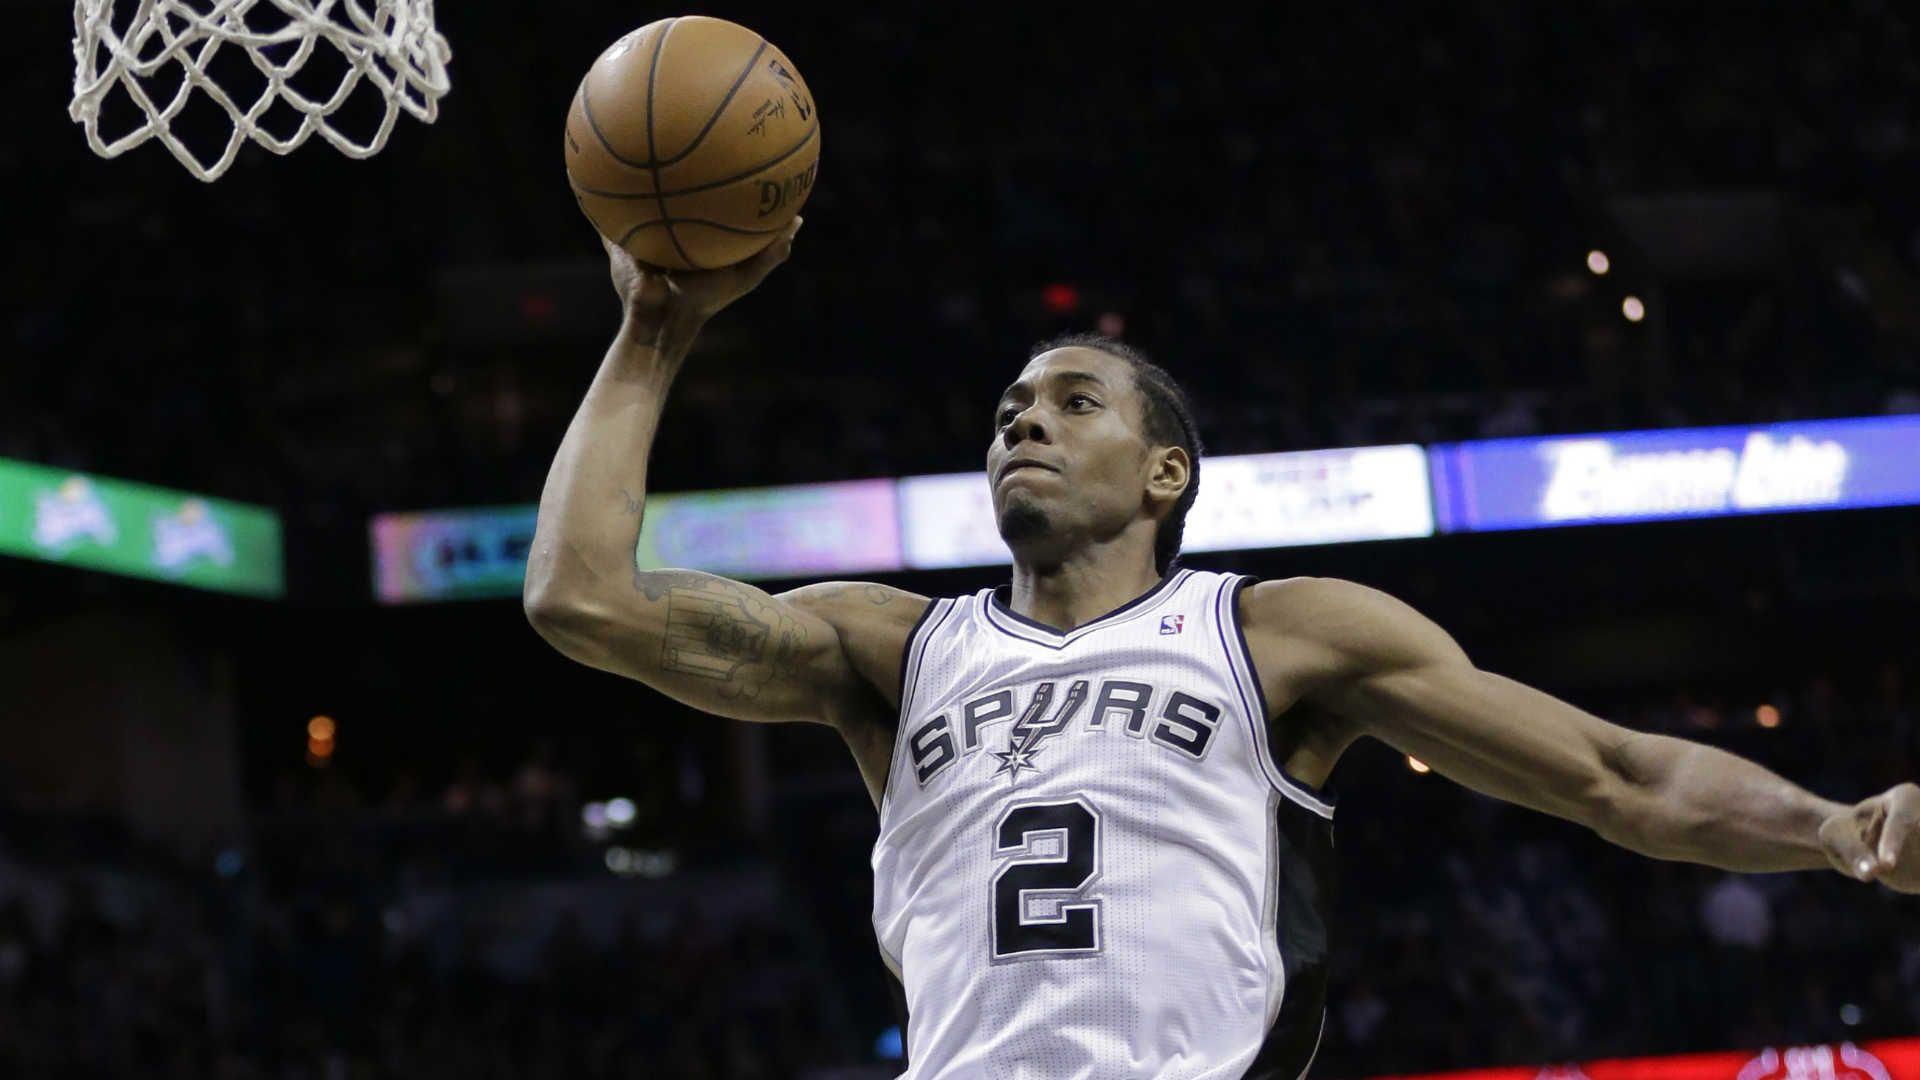 Kawhi Leonard signs maximum contract extension with Spurs, reports